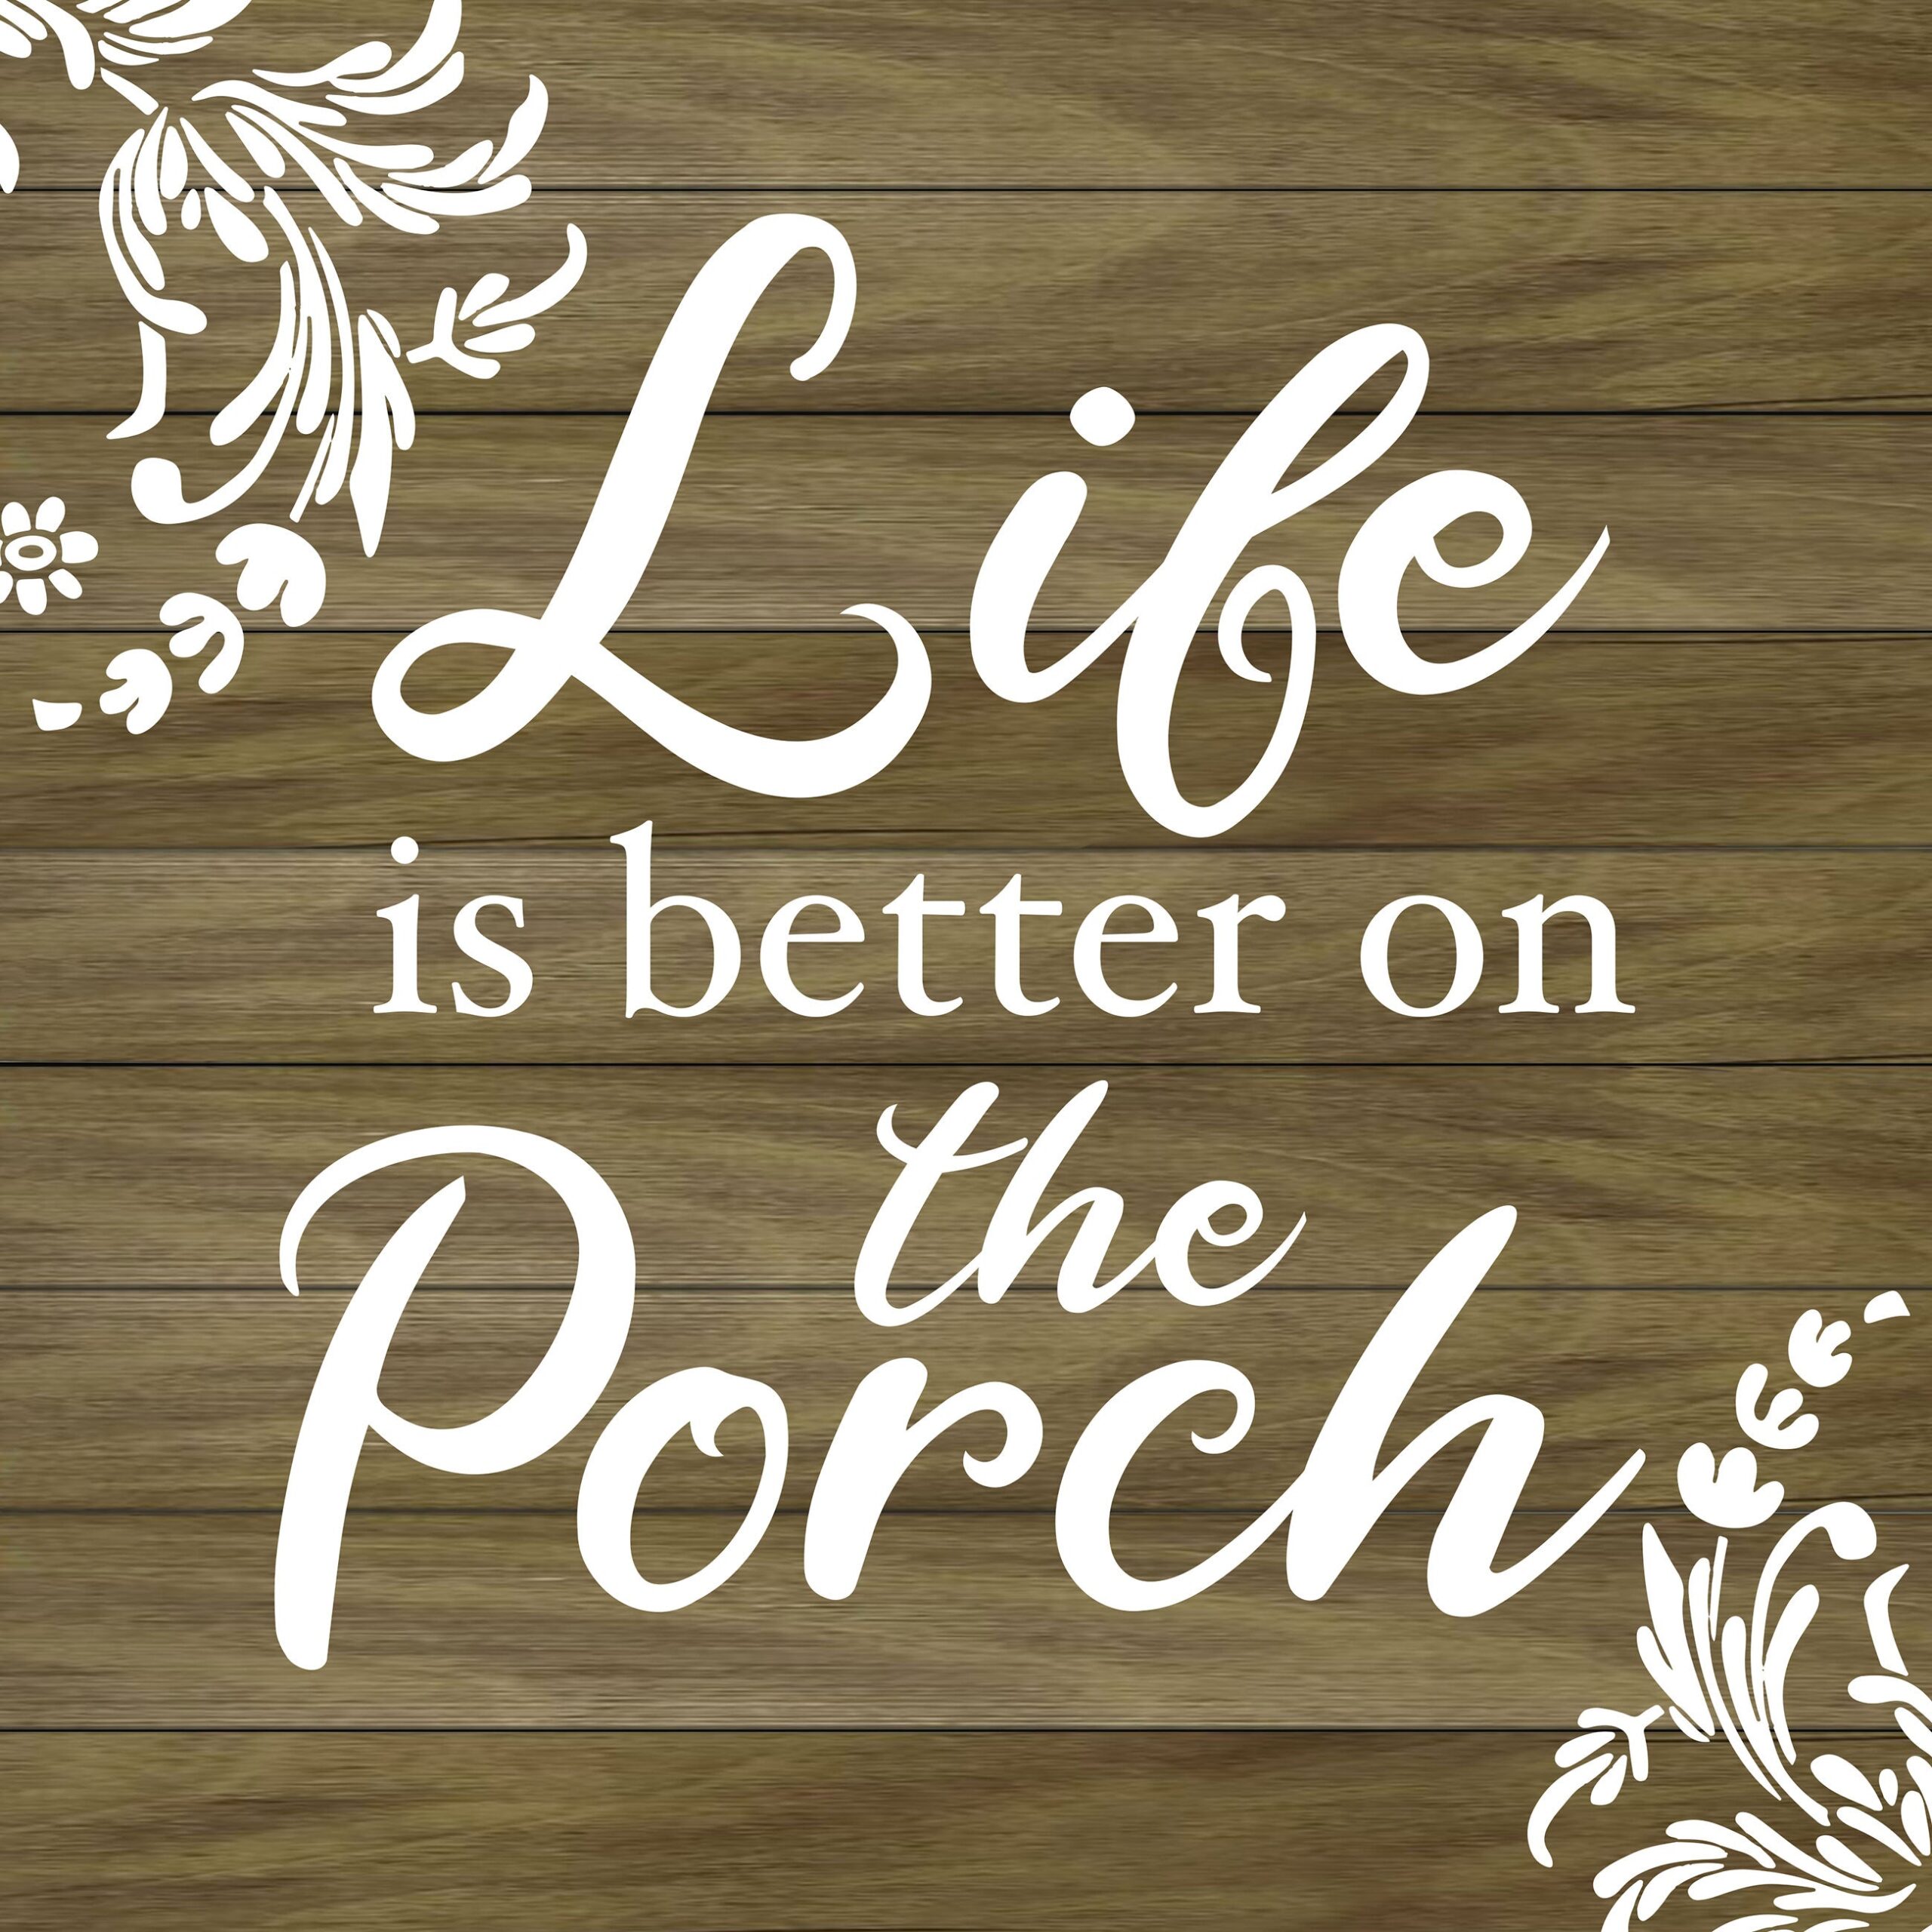 Life is better on the porch / 12x12 Indoor/Outdoor Recycled Plastic Wall Art